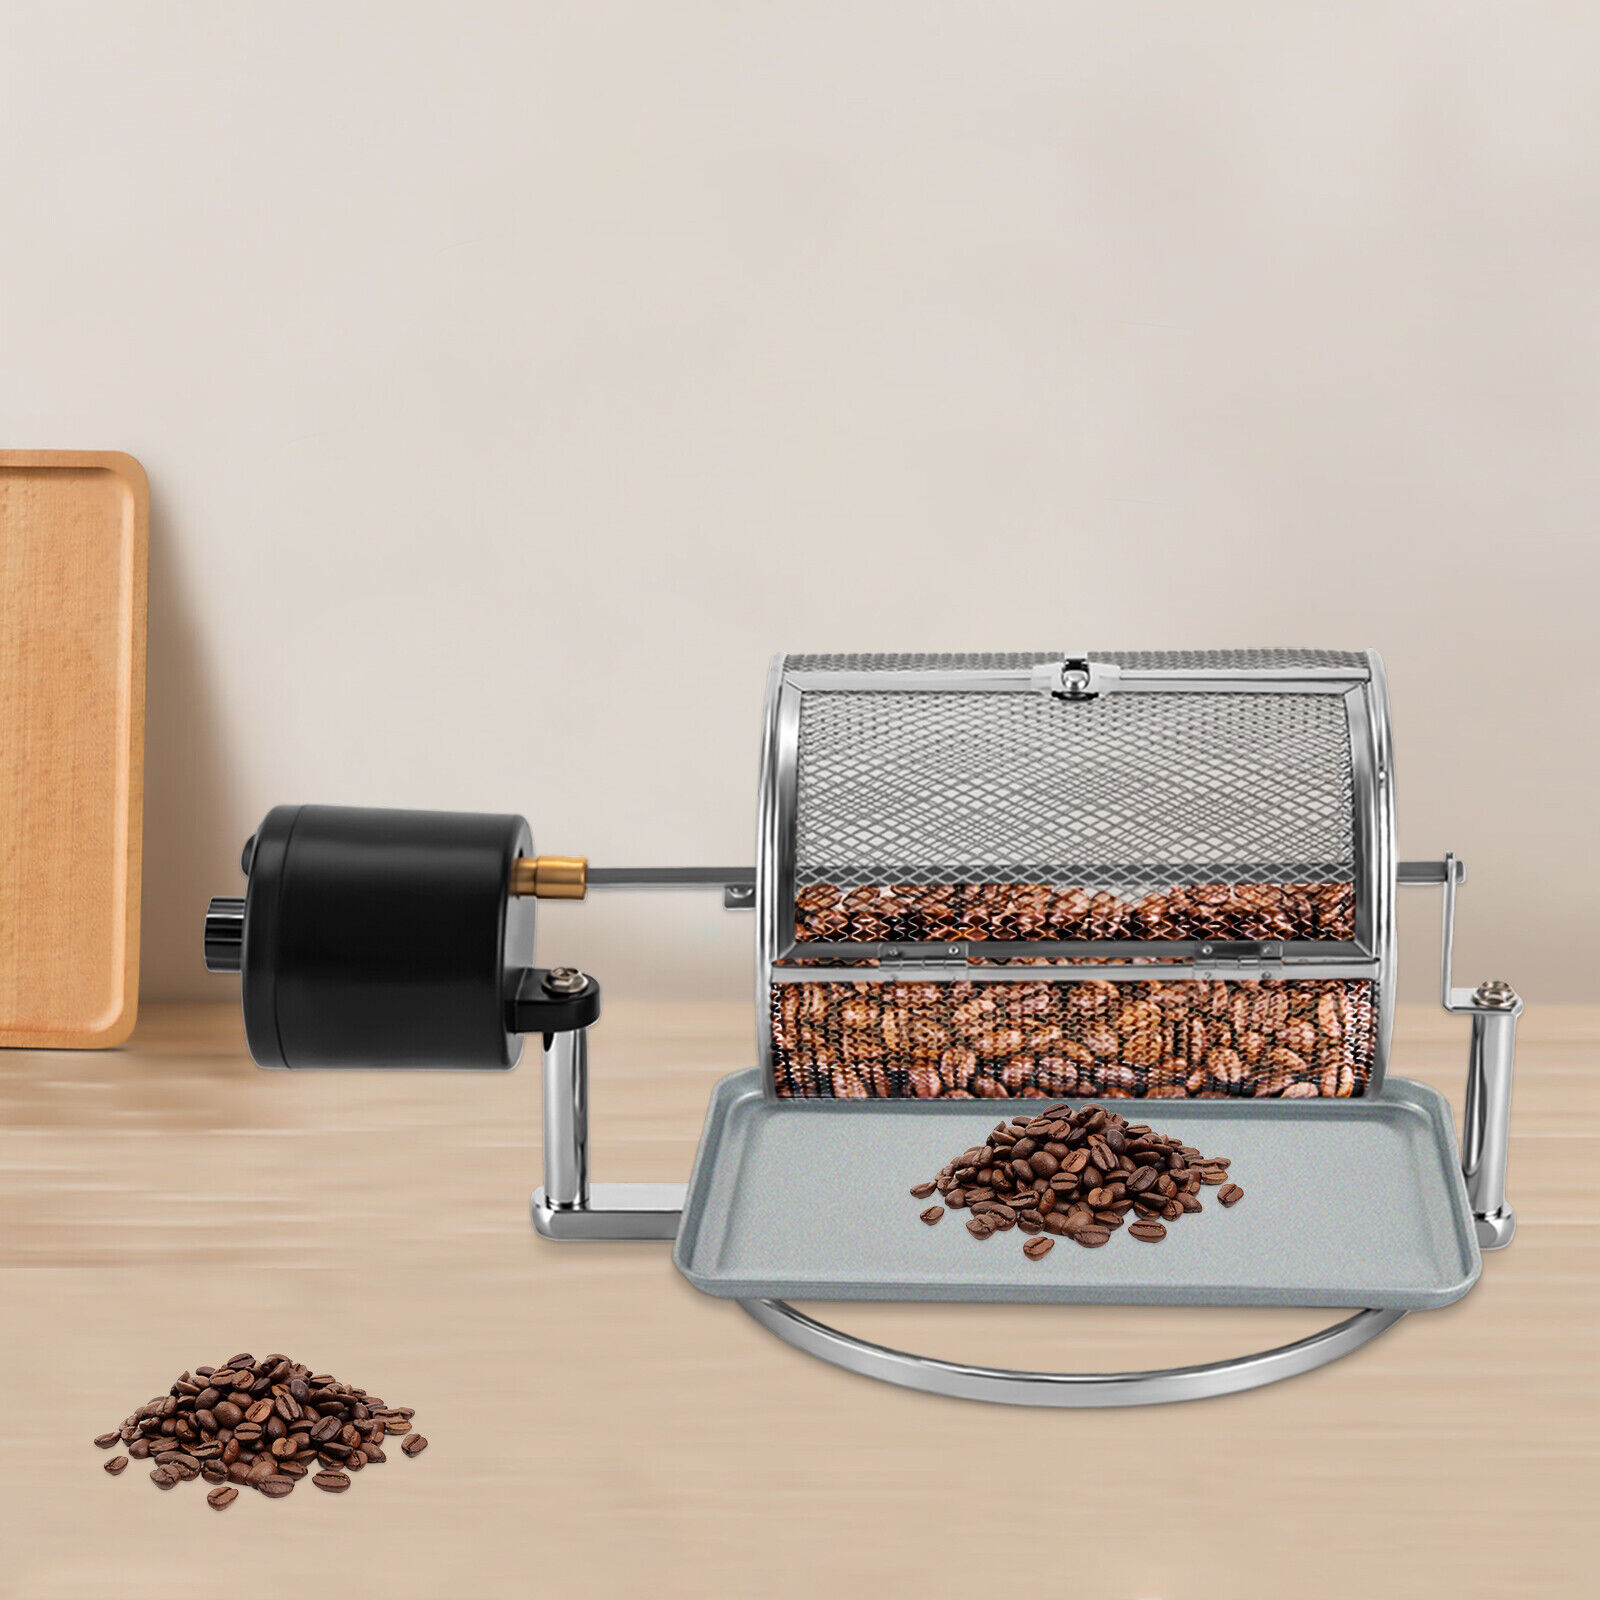 14W Electric Coffee Roaster Machine Coffee Bean Roaster Machine for Home Use Unbranded Does not apply - фотография #23